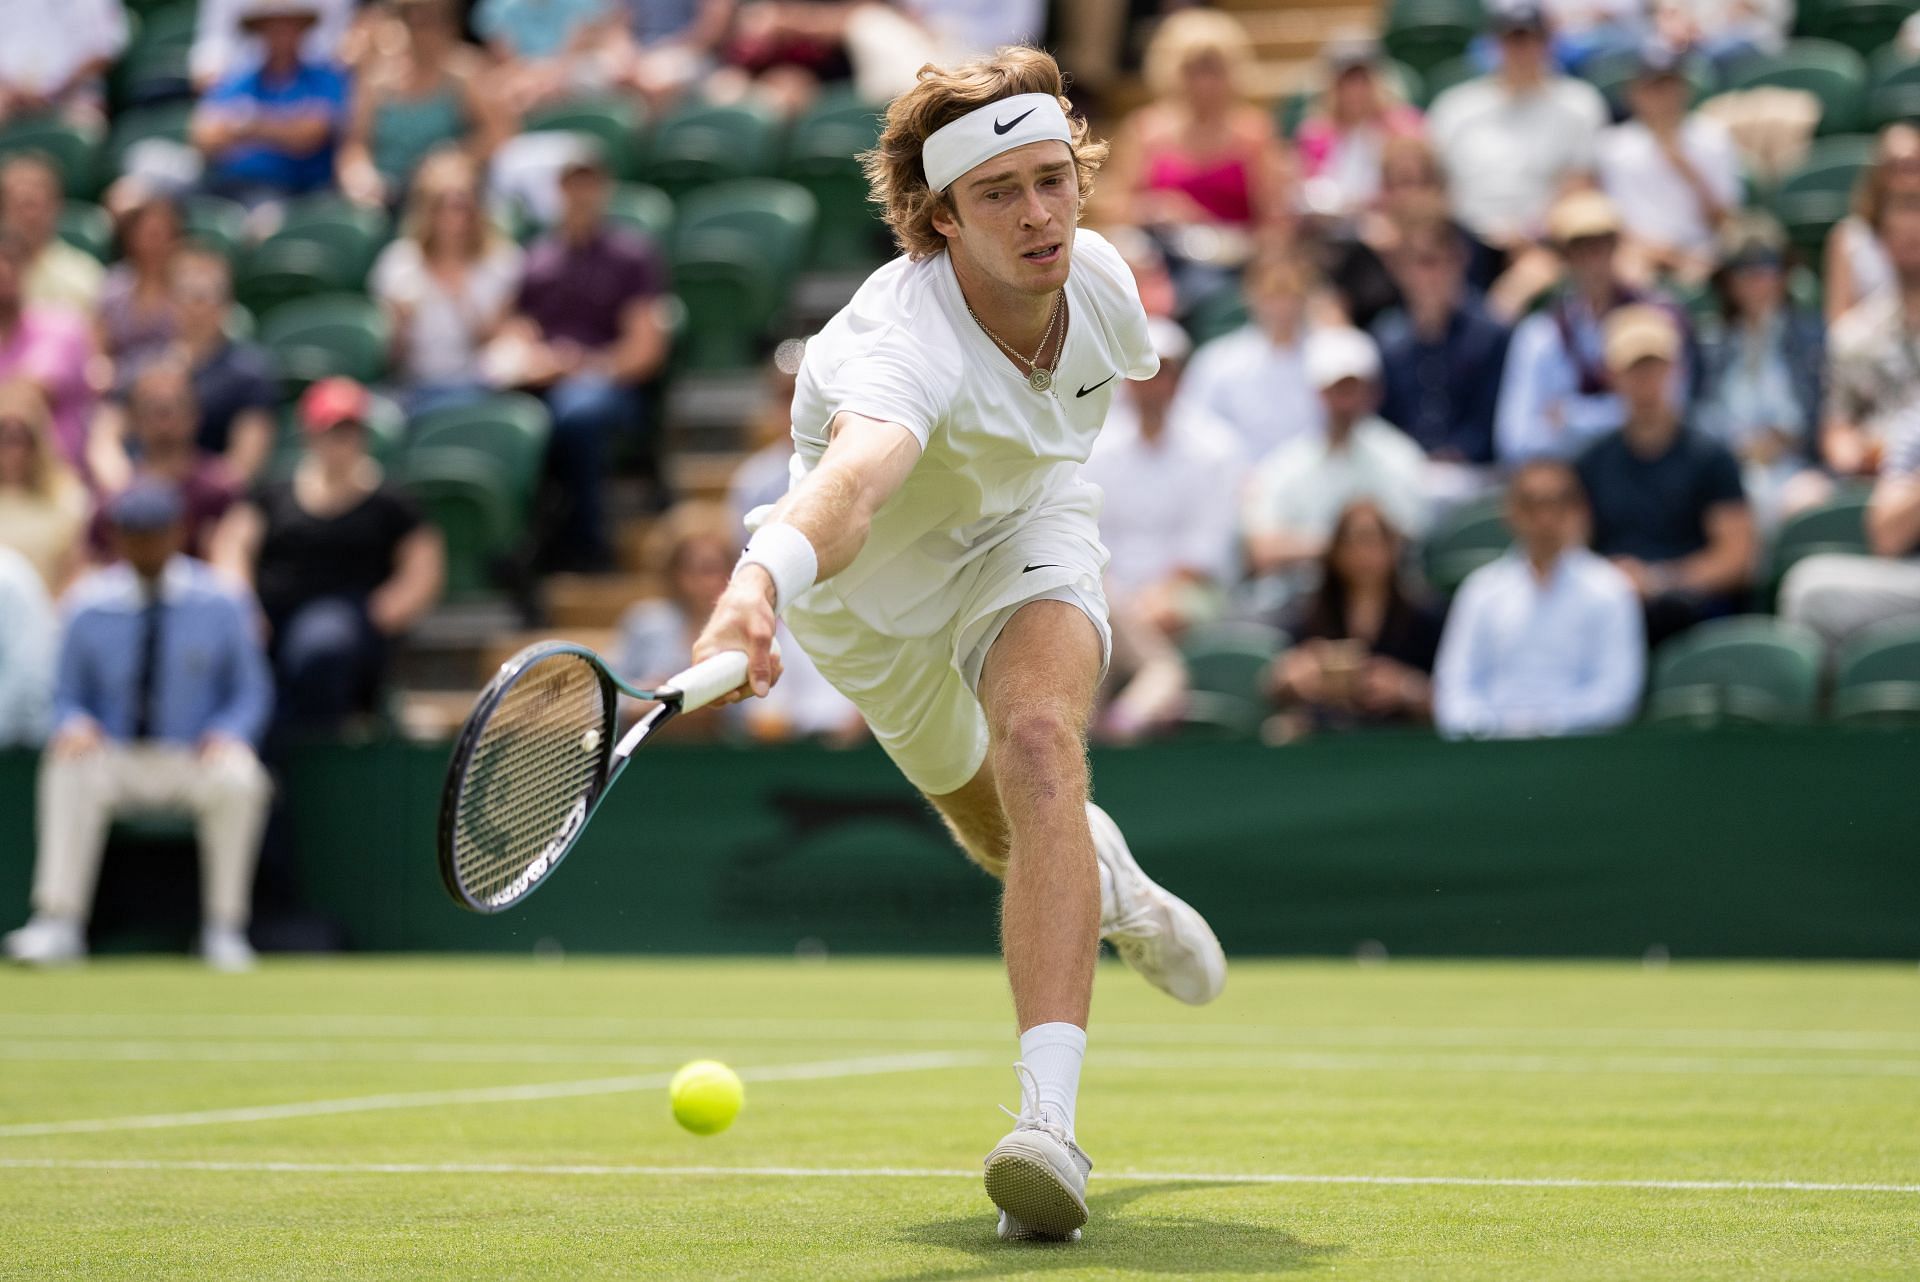 Andrey Rublev at the 2021 Championships.